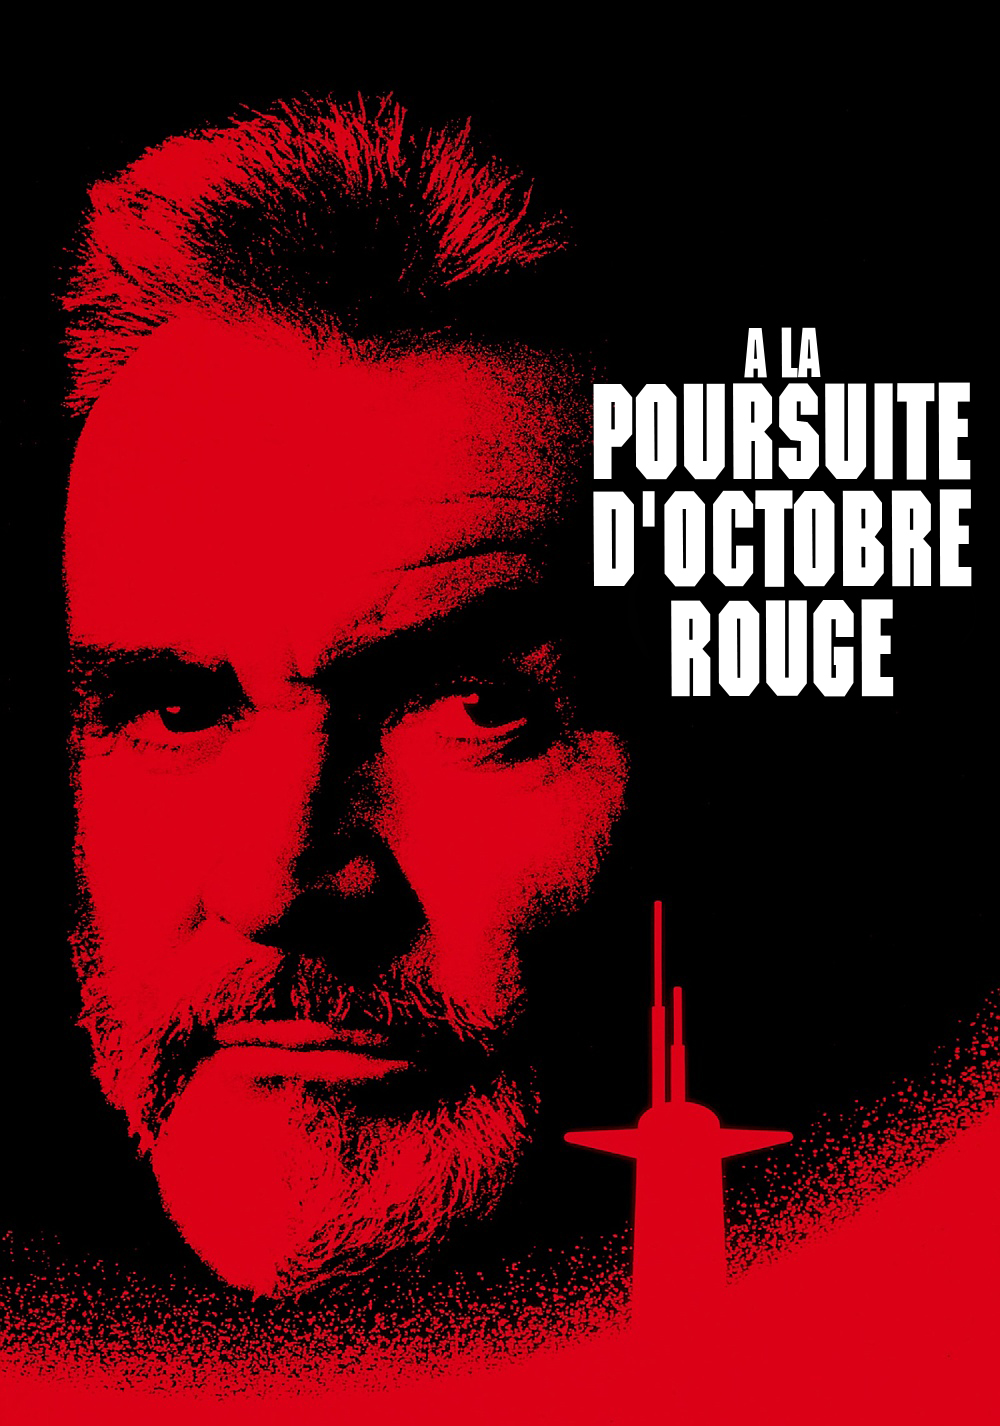 The Hunt for Red October Picture